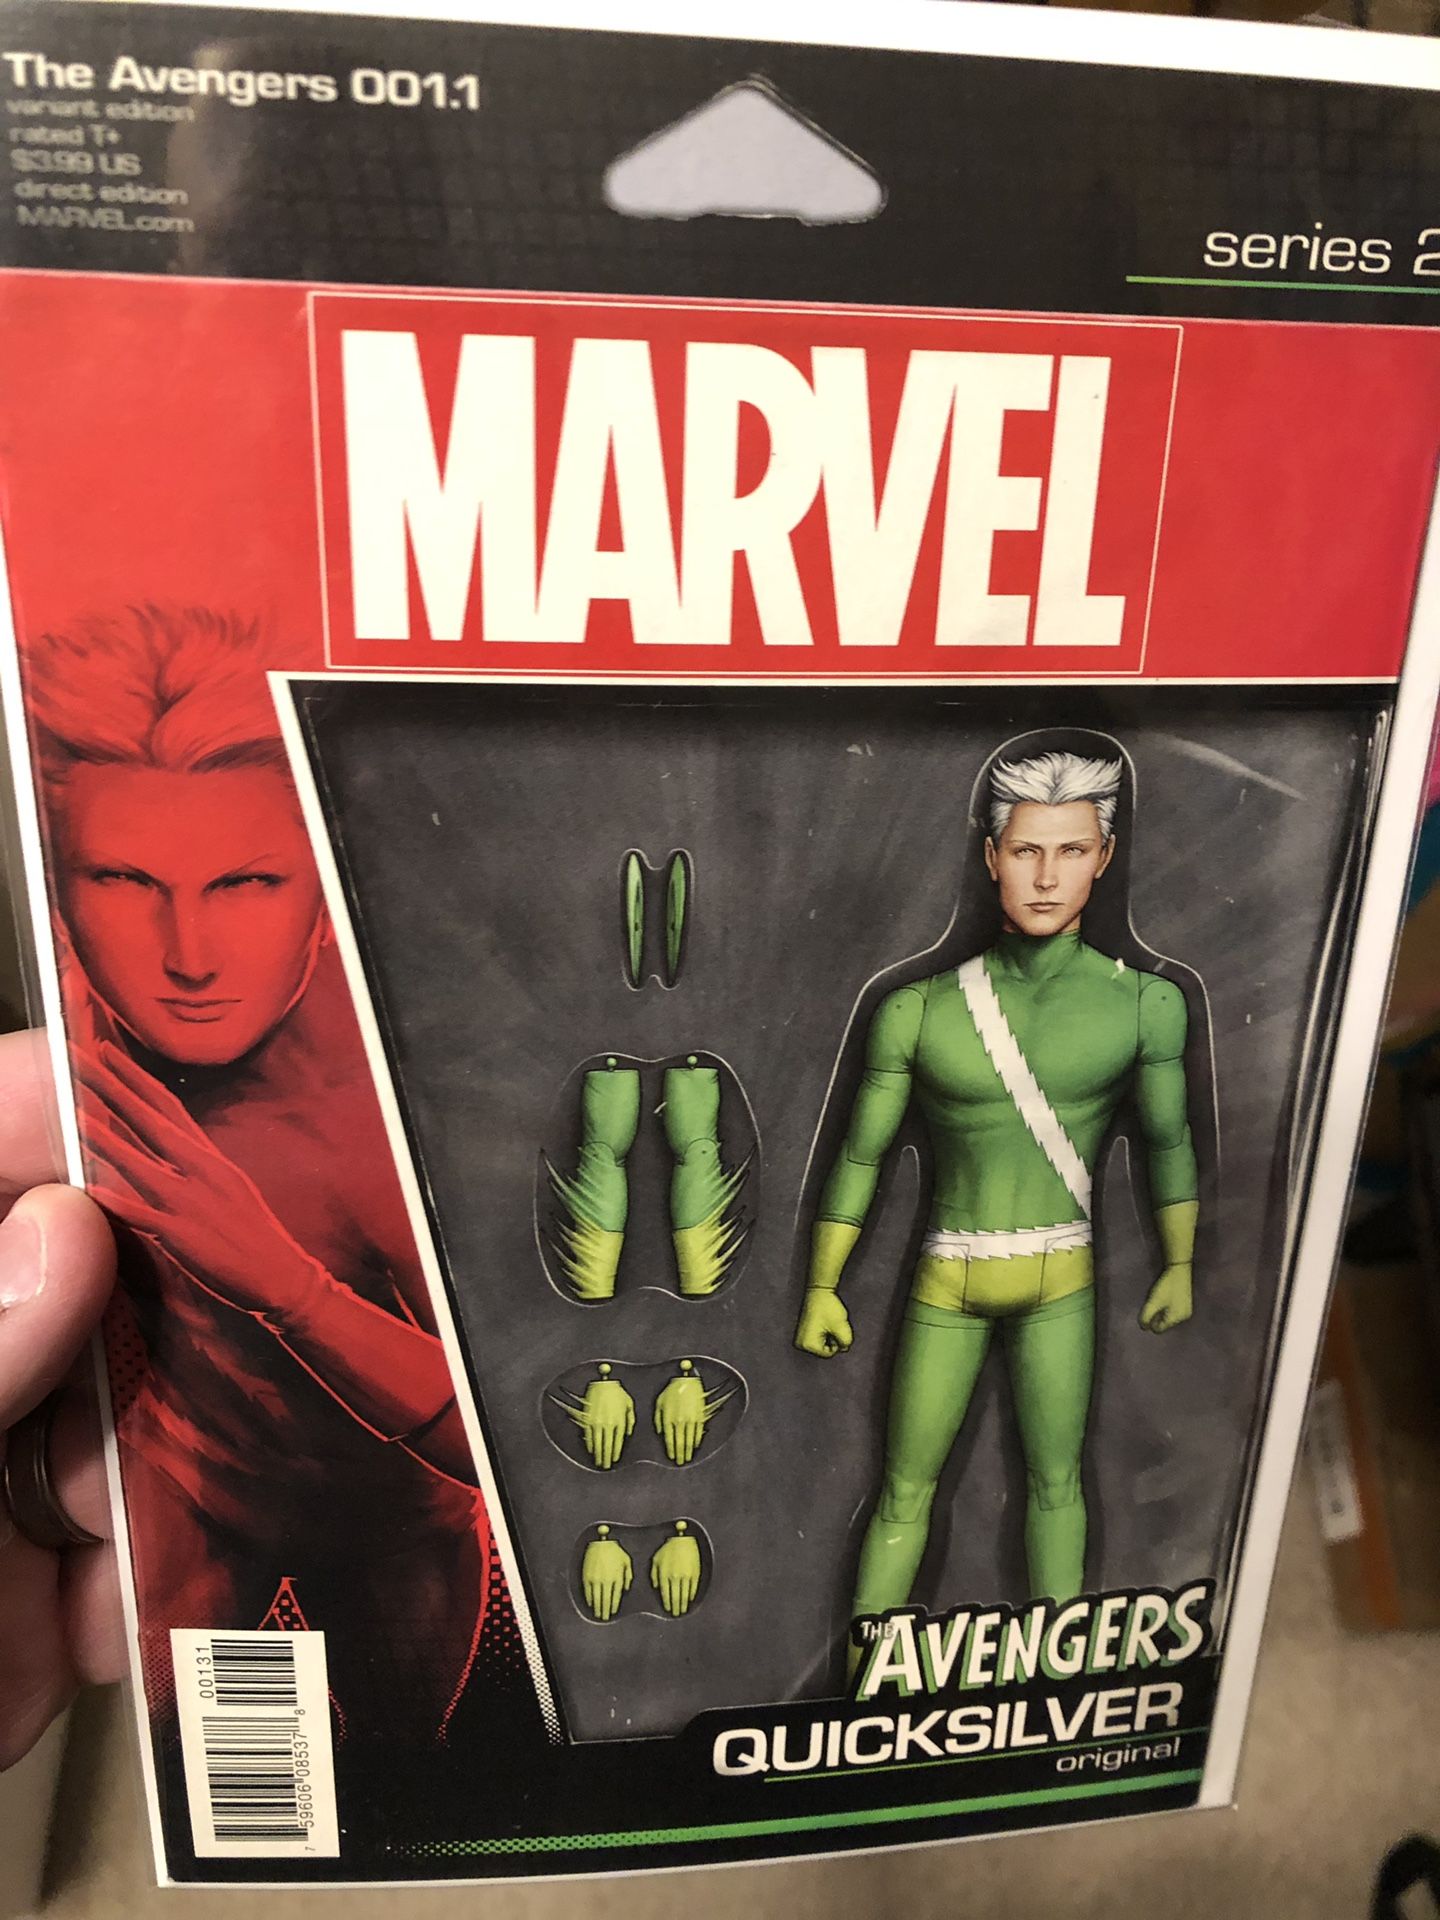 Marvel Comics AVENGERS issue #1.1 Action Figure Variant Cover Comic Book - QuickSilver!!